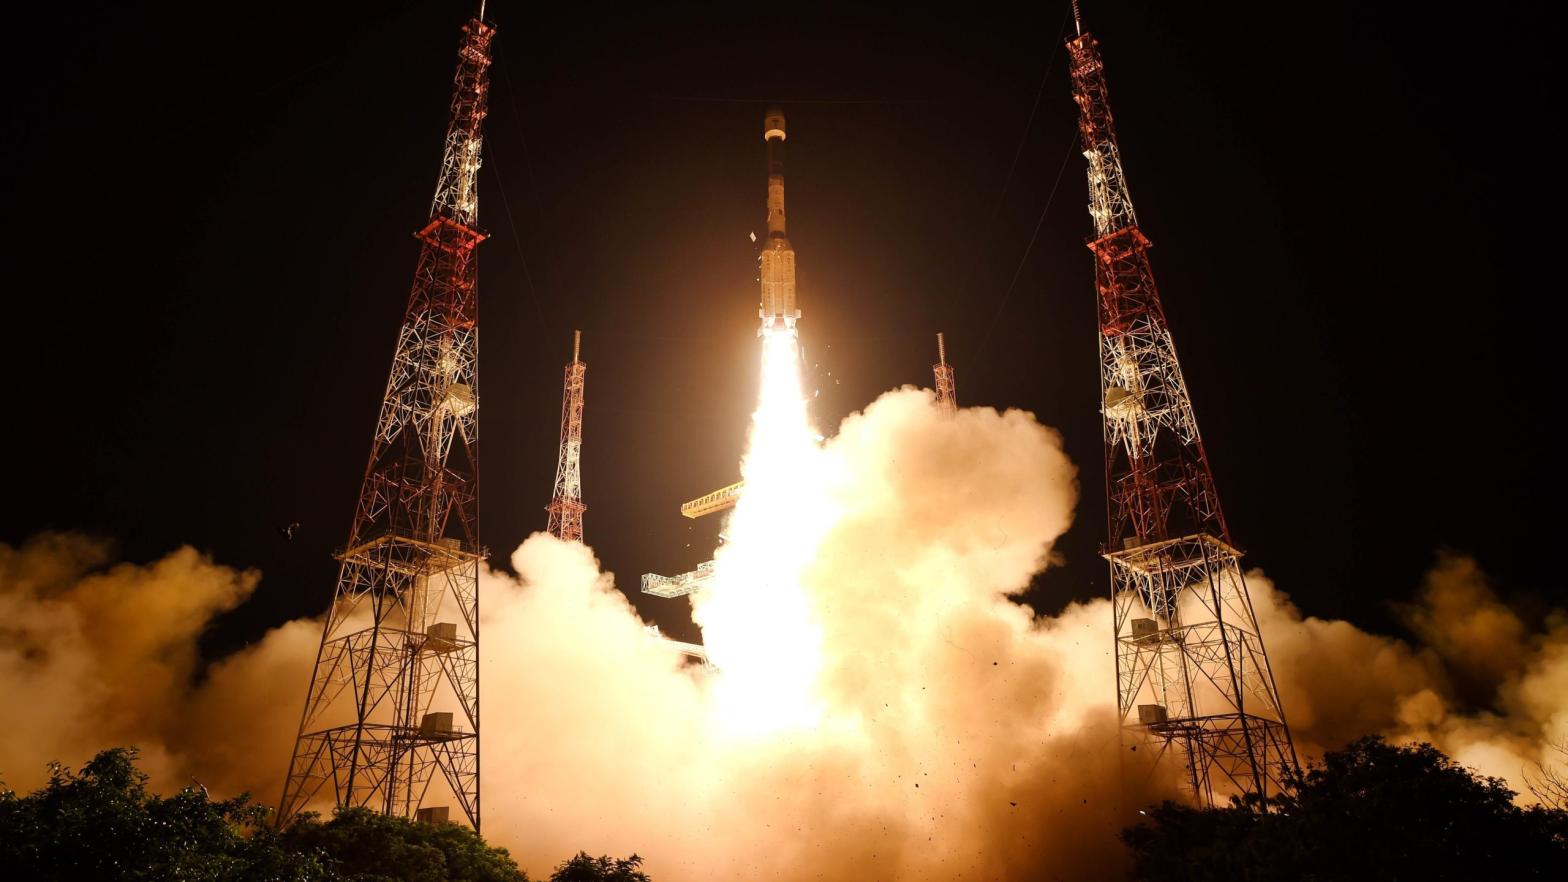 Launch of the GSLV-F10 rocket on August 12, 2021. (Image: ISRO)